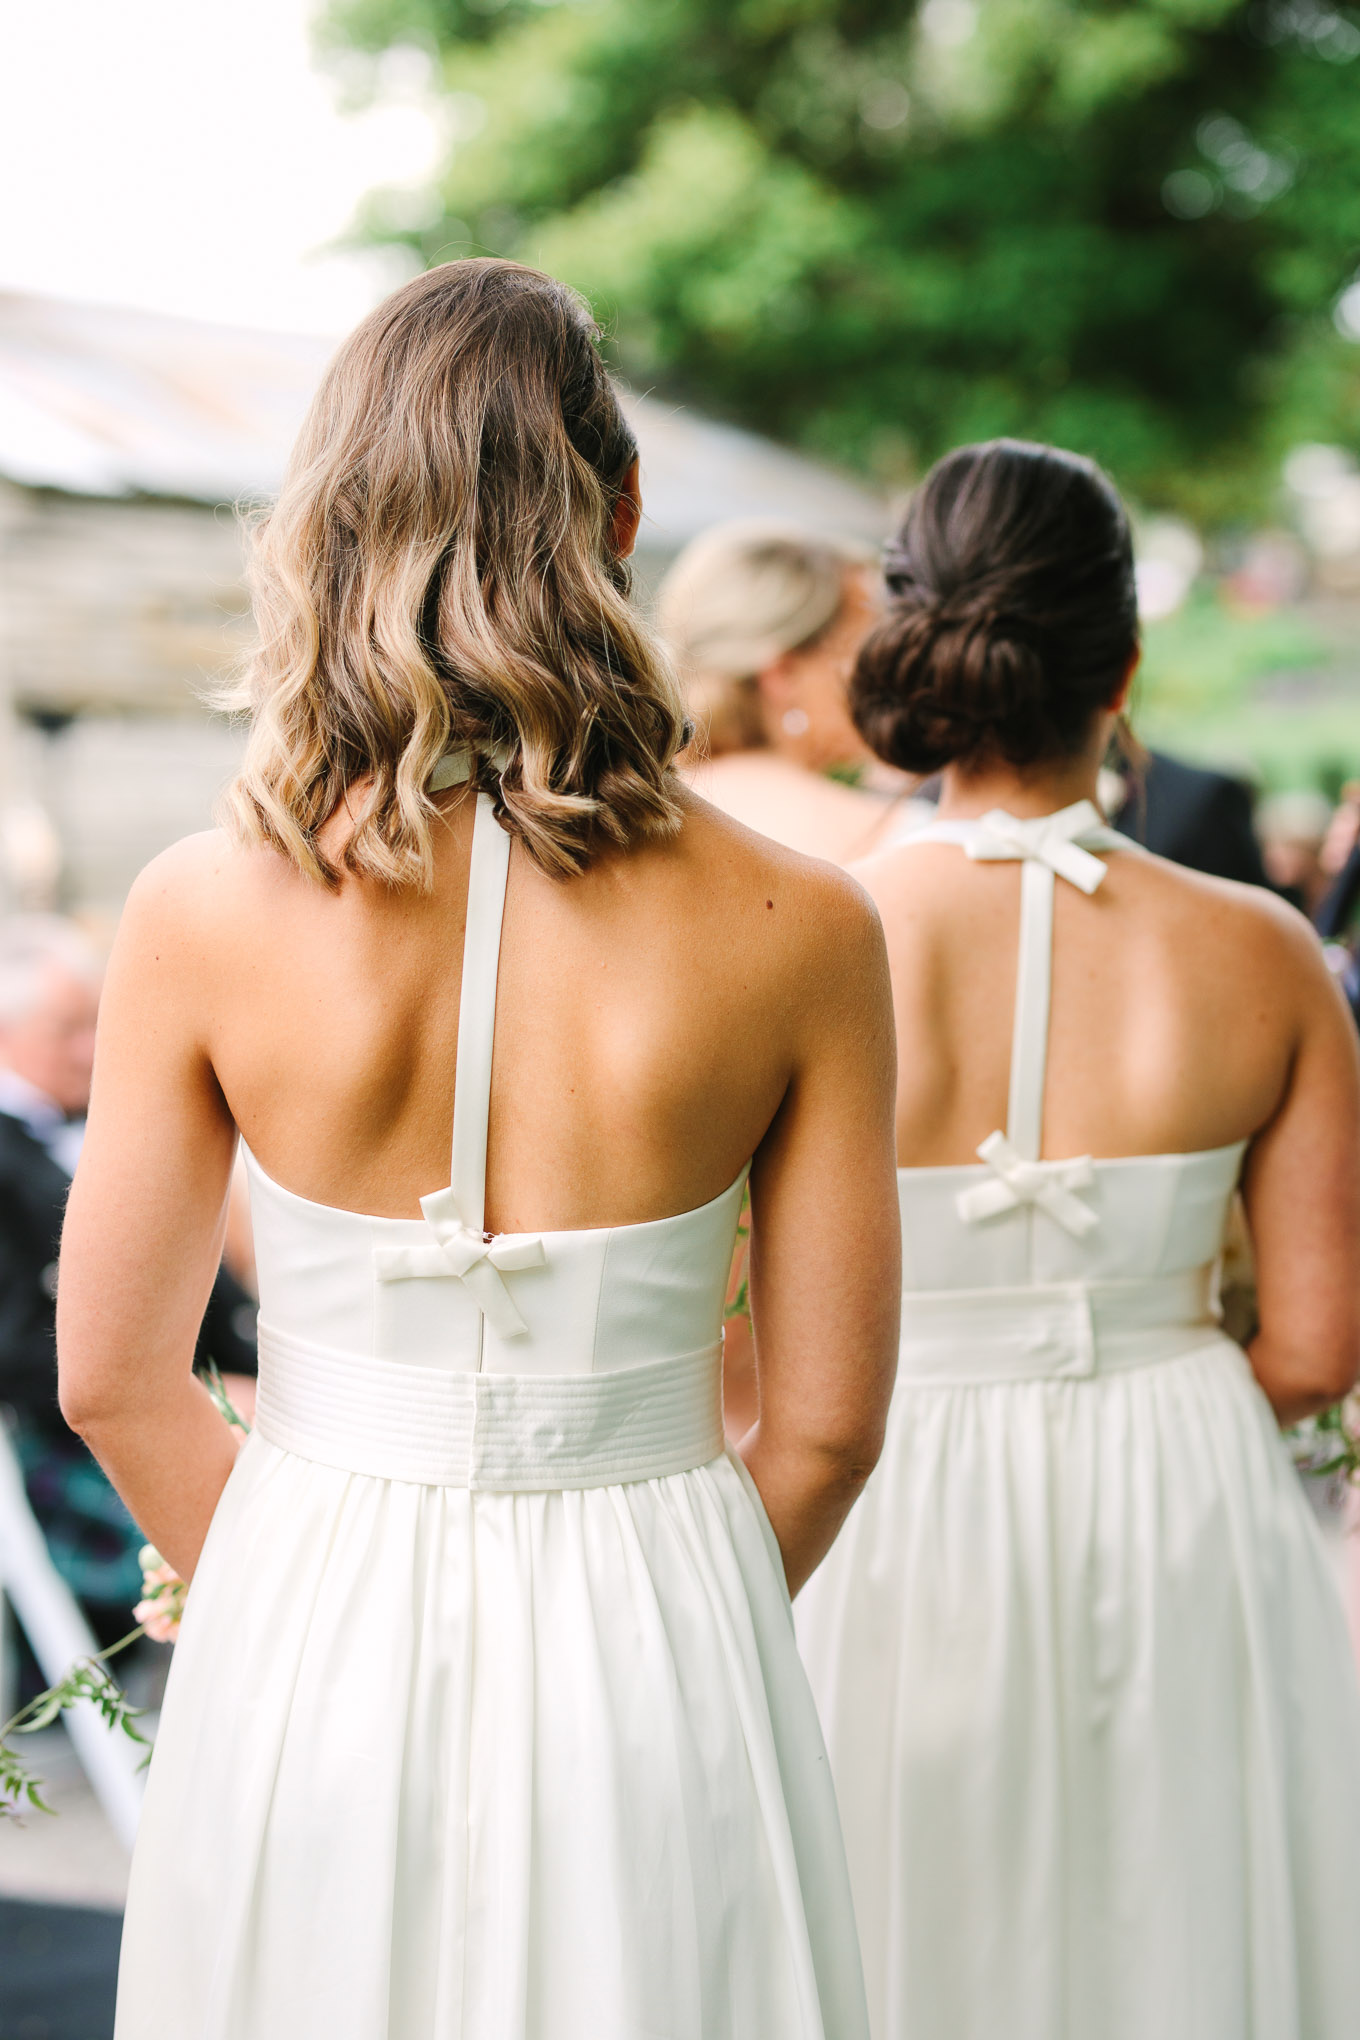 Detail of bridesmaids' dress during wedding ceremony. Millbrook Resort Queenstown New Zealand wedding by Mary Costa Photography | www.marycostaweddings.com